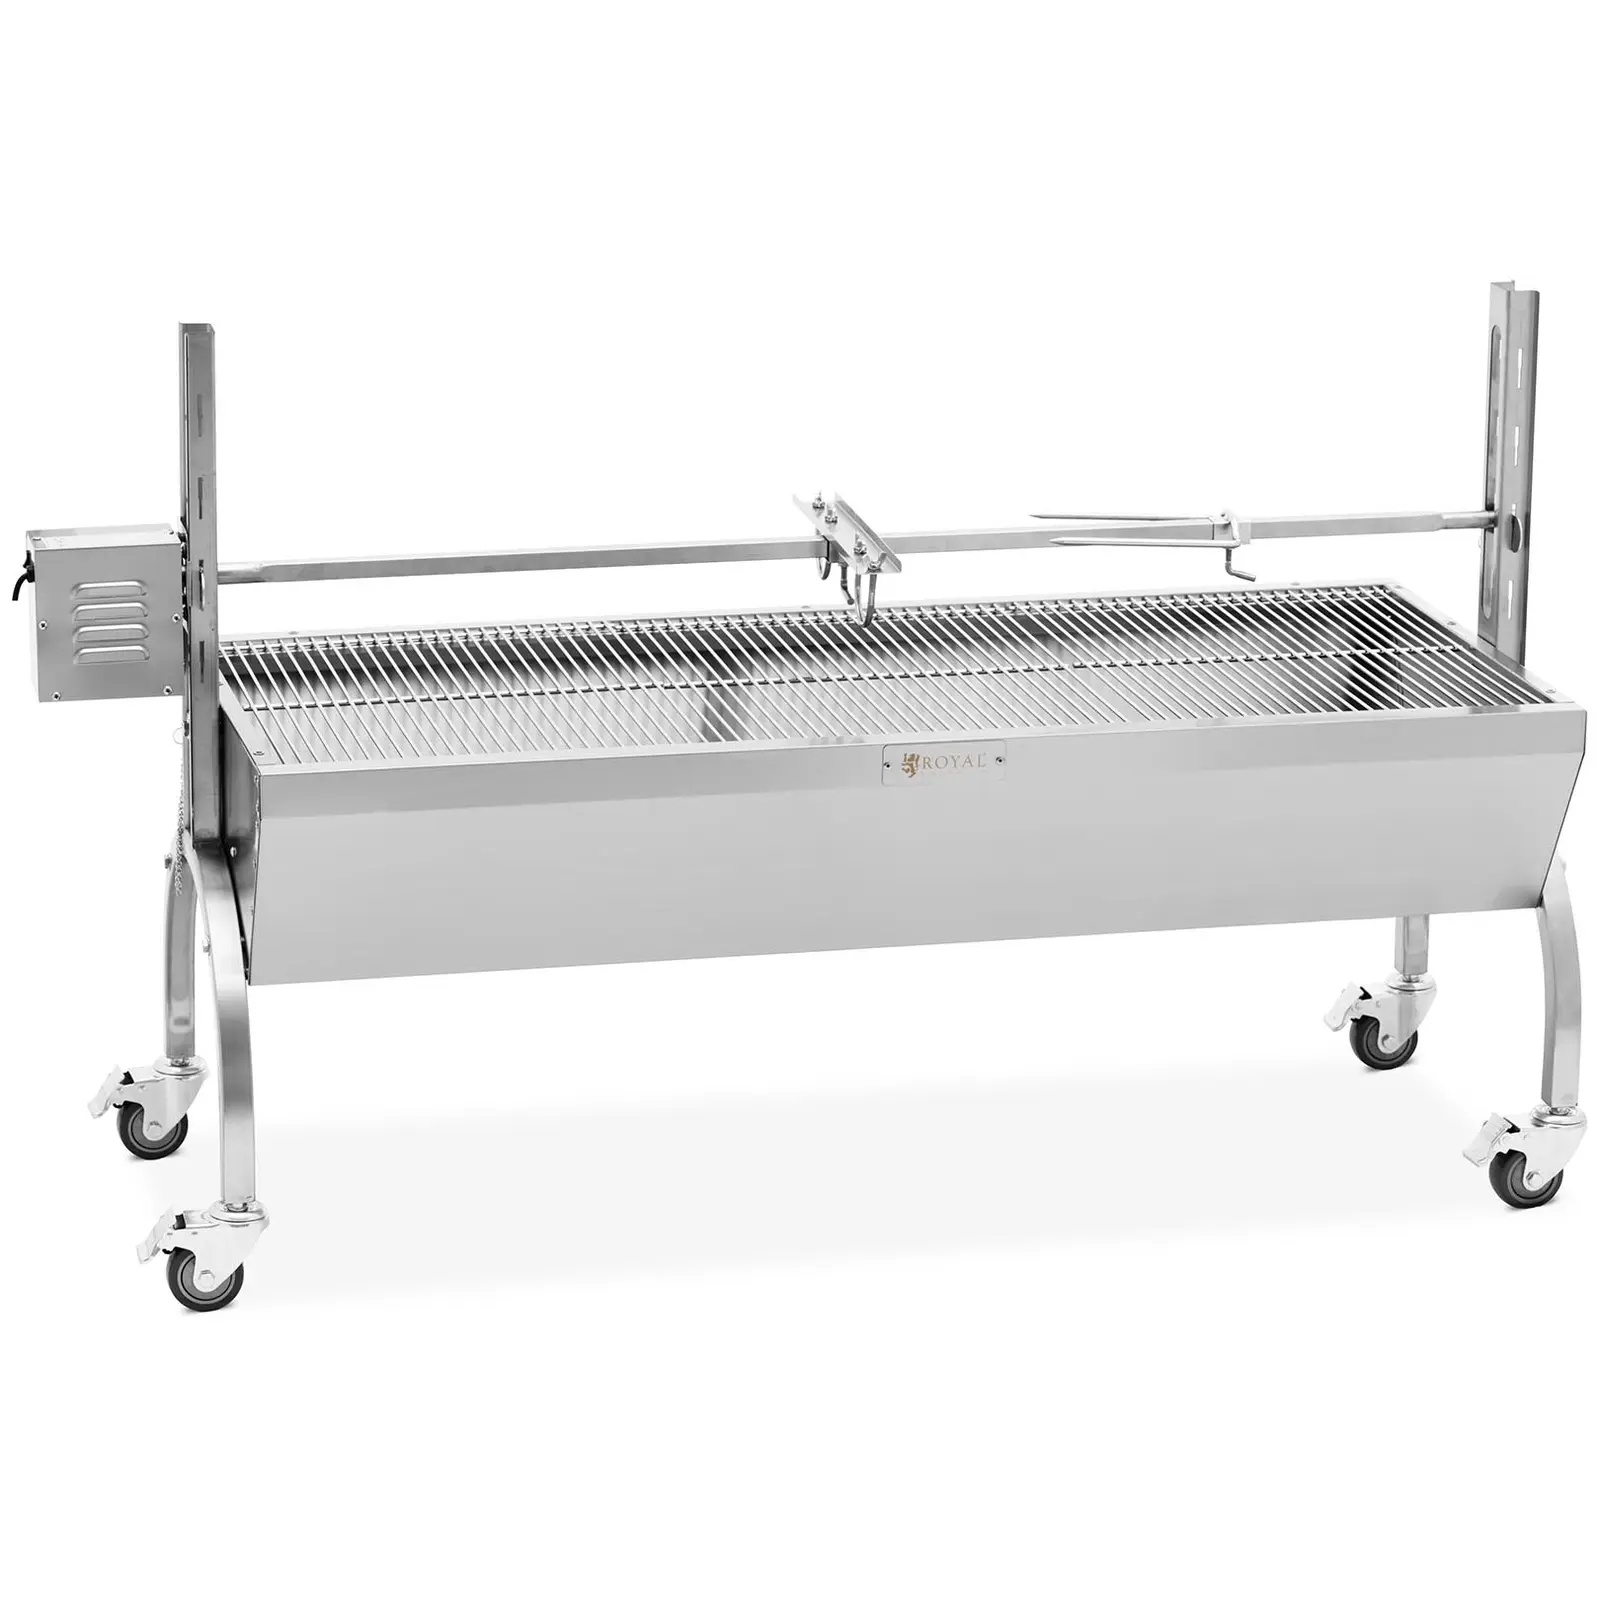 Factory second Roasting Spit - with motor - 40 kg - stainless steel - grill spit length: 137 cm